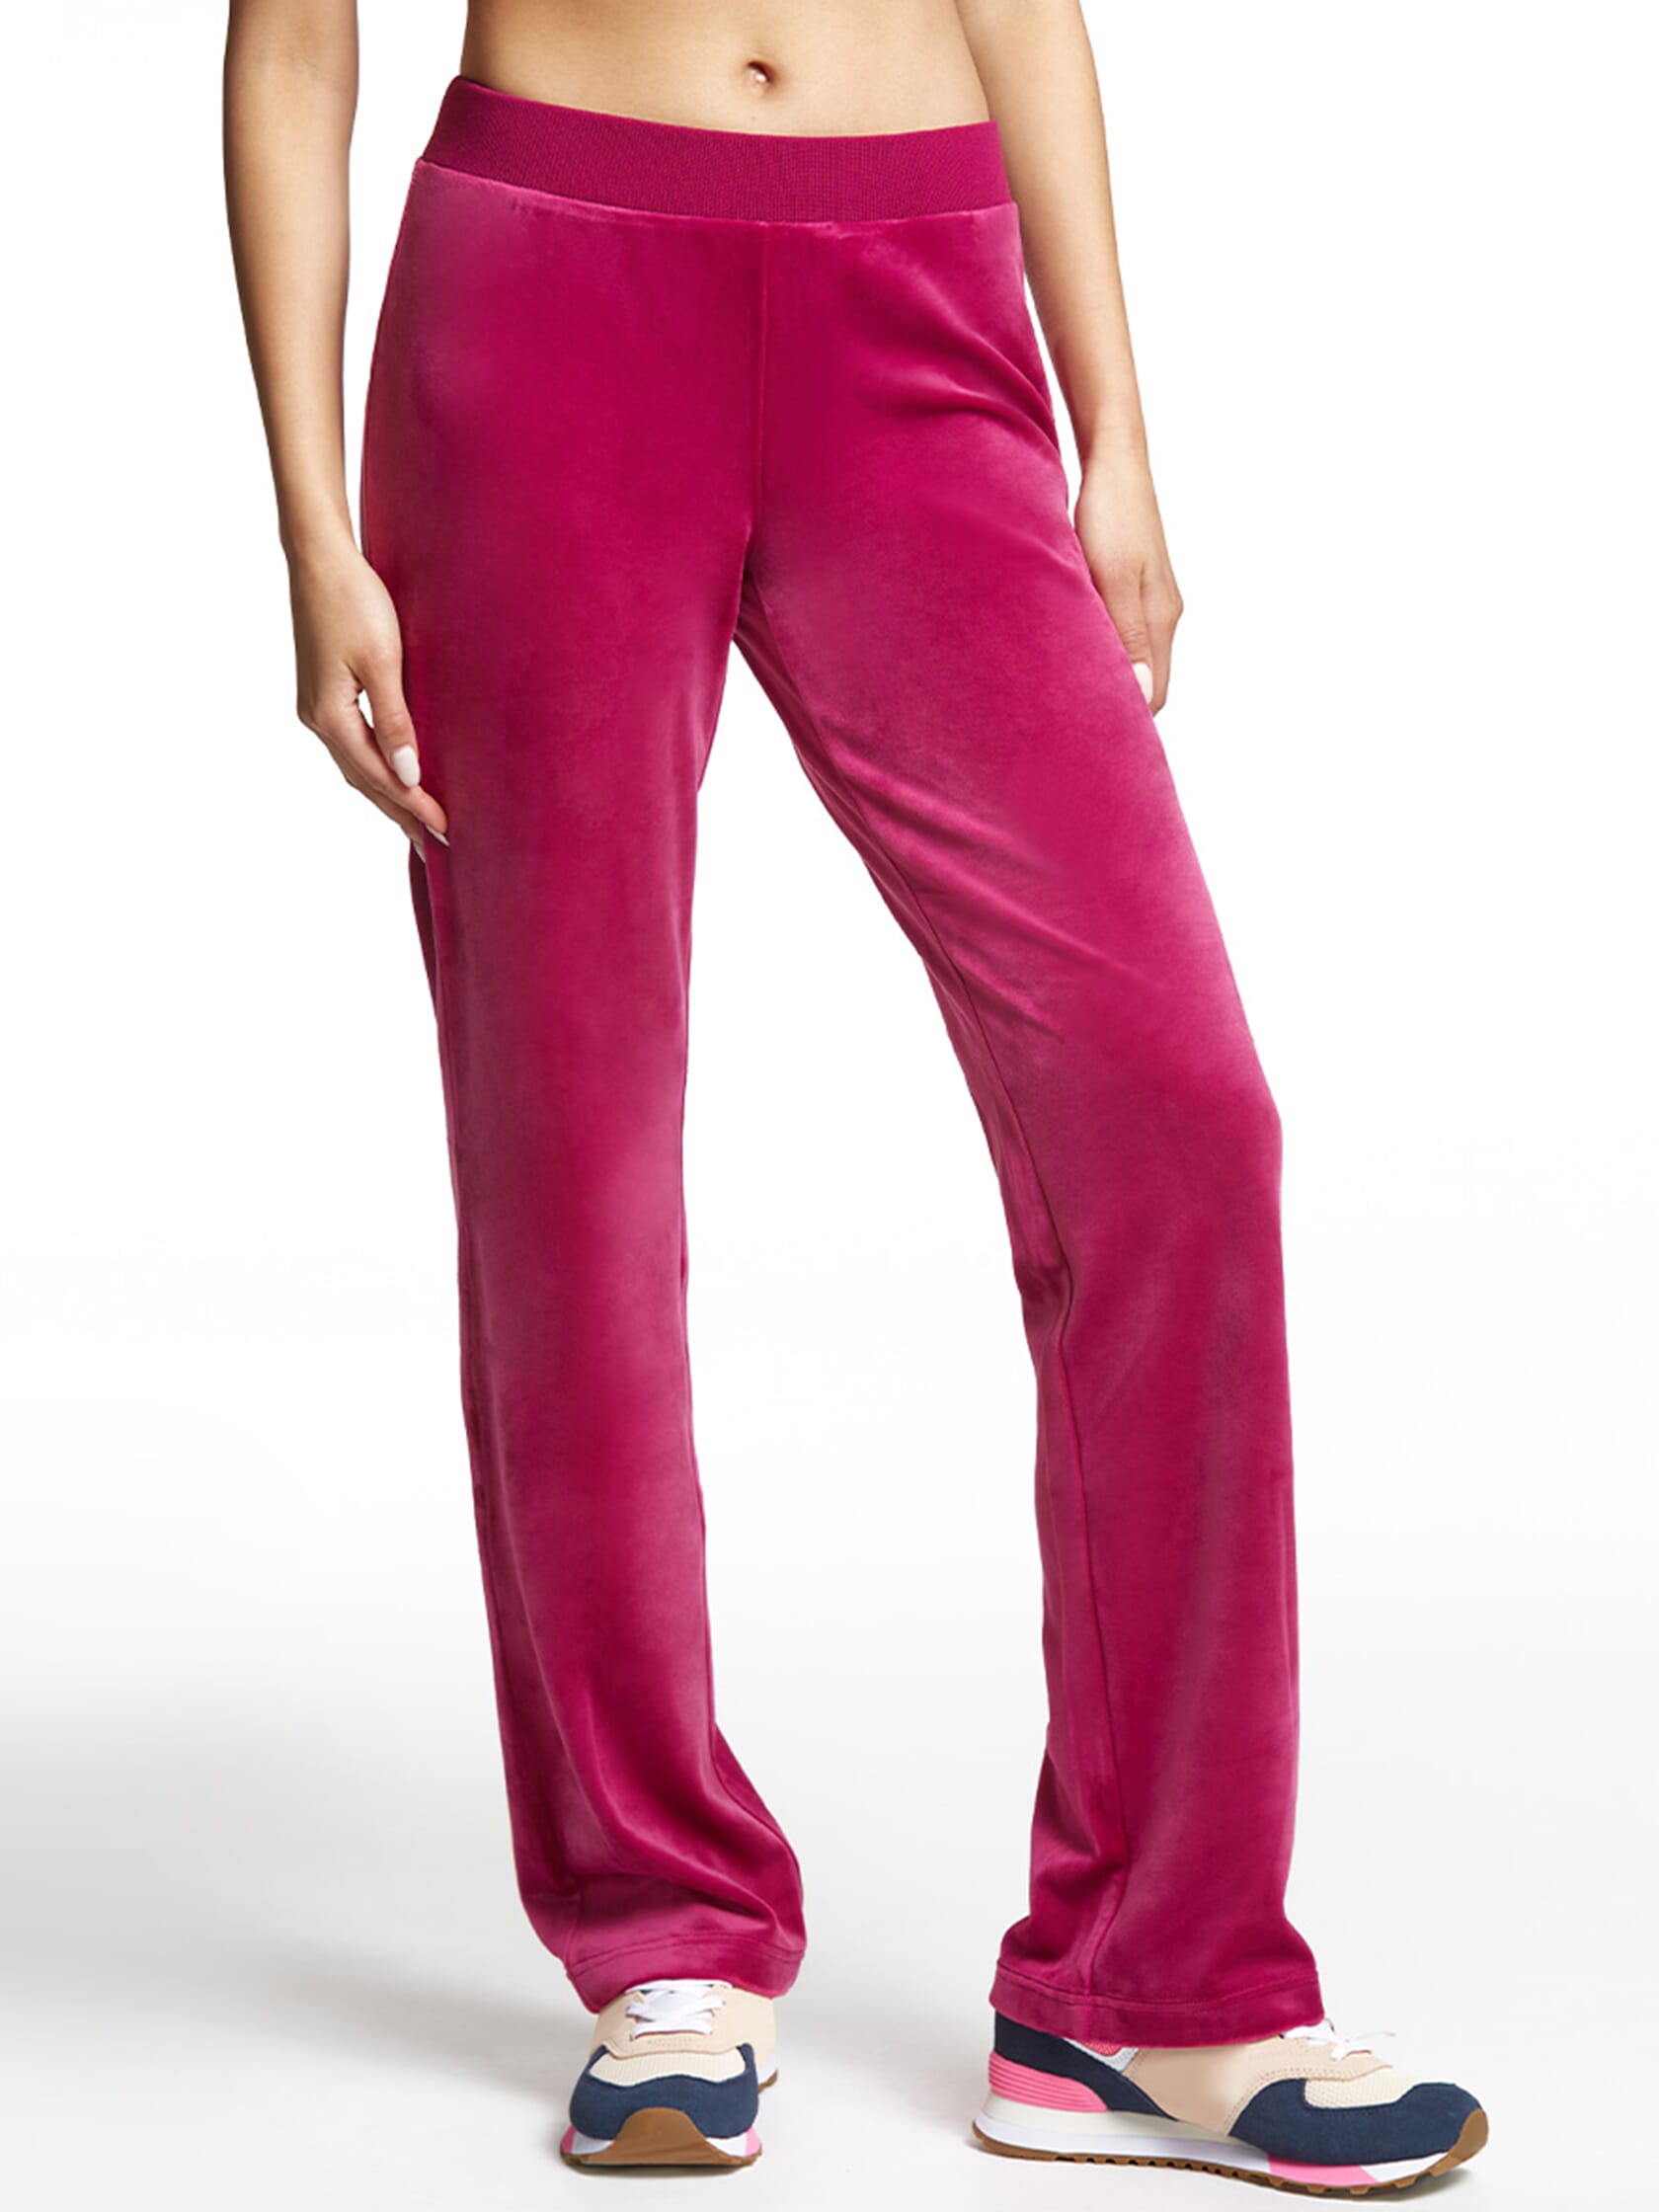 Juicy Couture Pink Track Pants Small